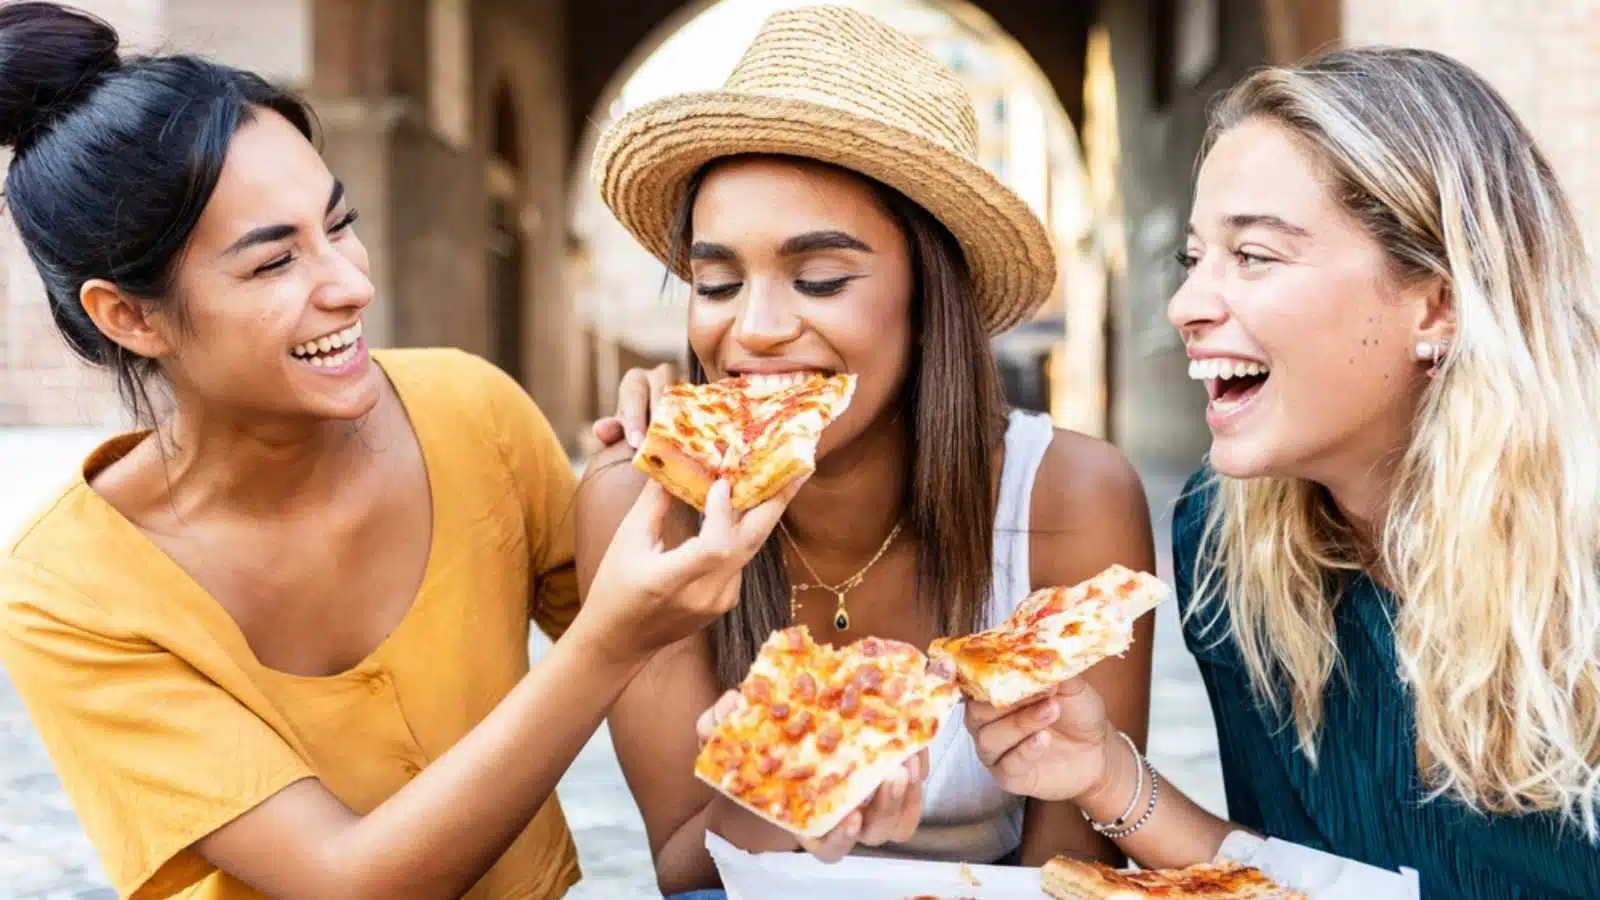 Woman eating pizza with friends